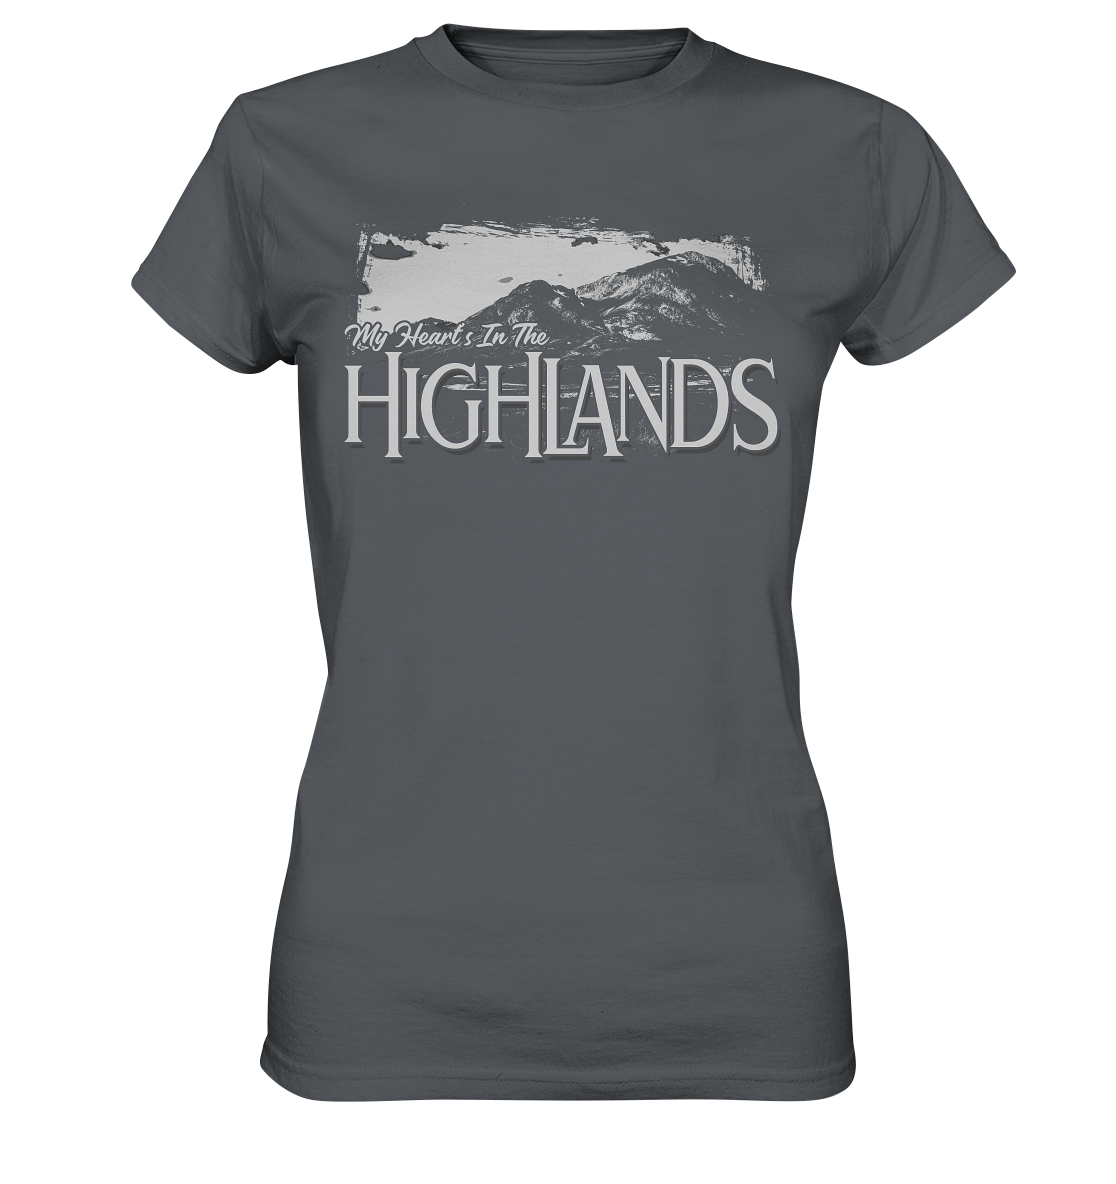 "My Heart's In The Highlands" - Ladies Premium Shirt